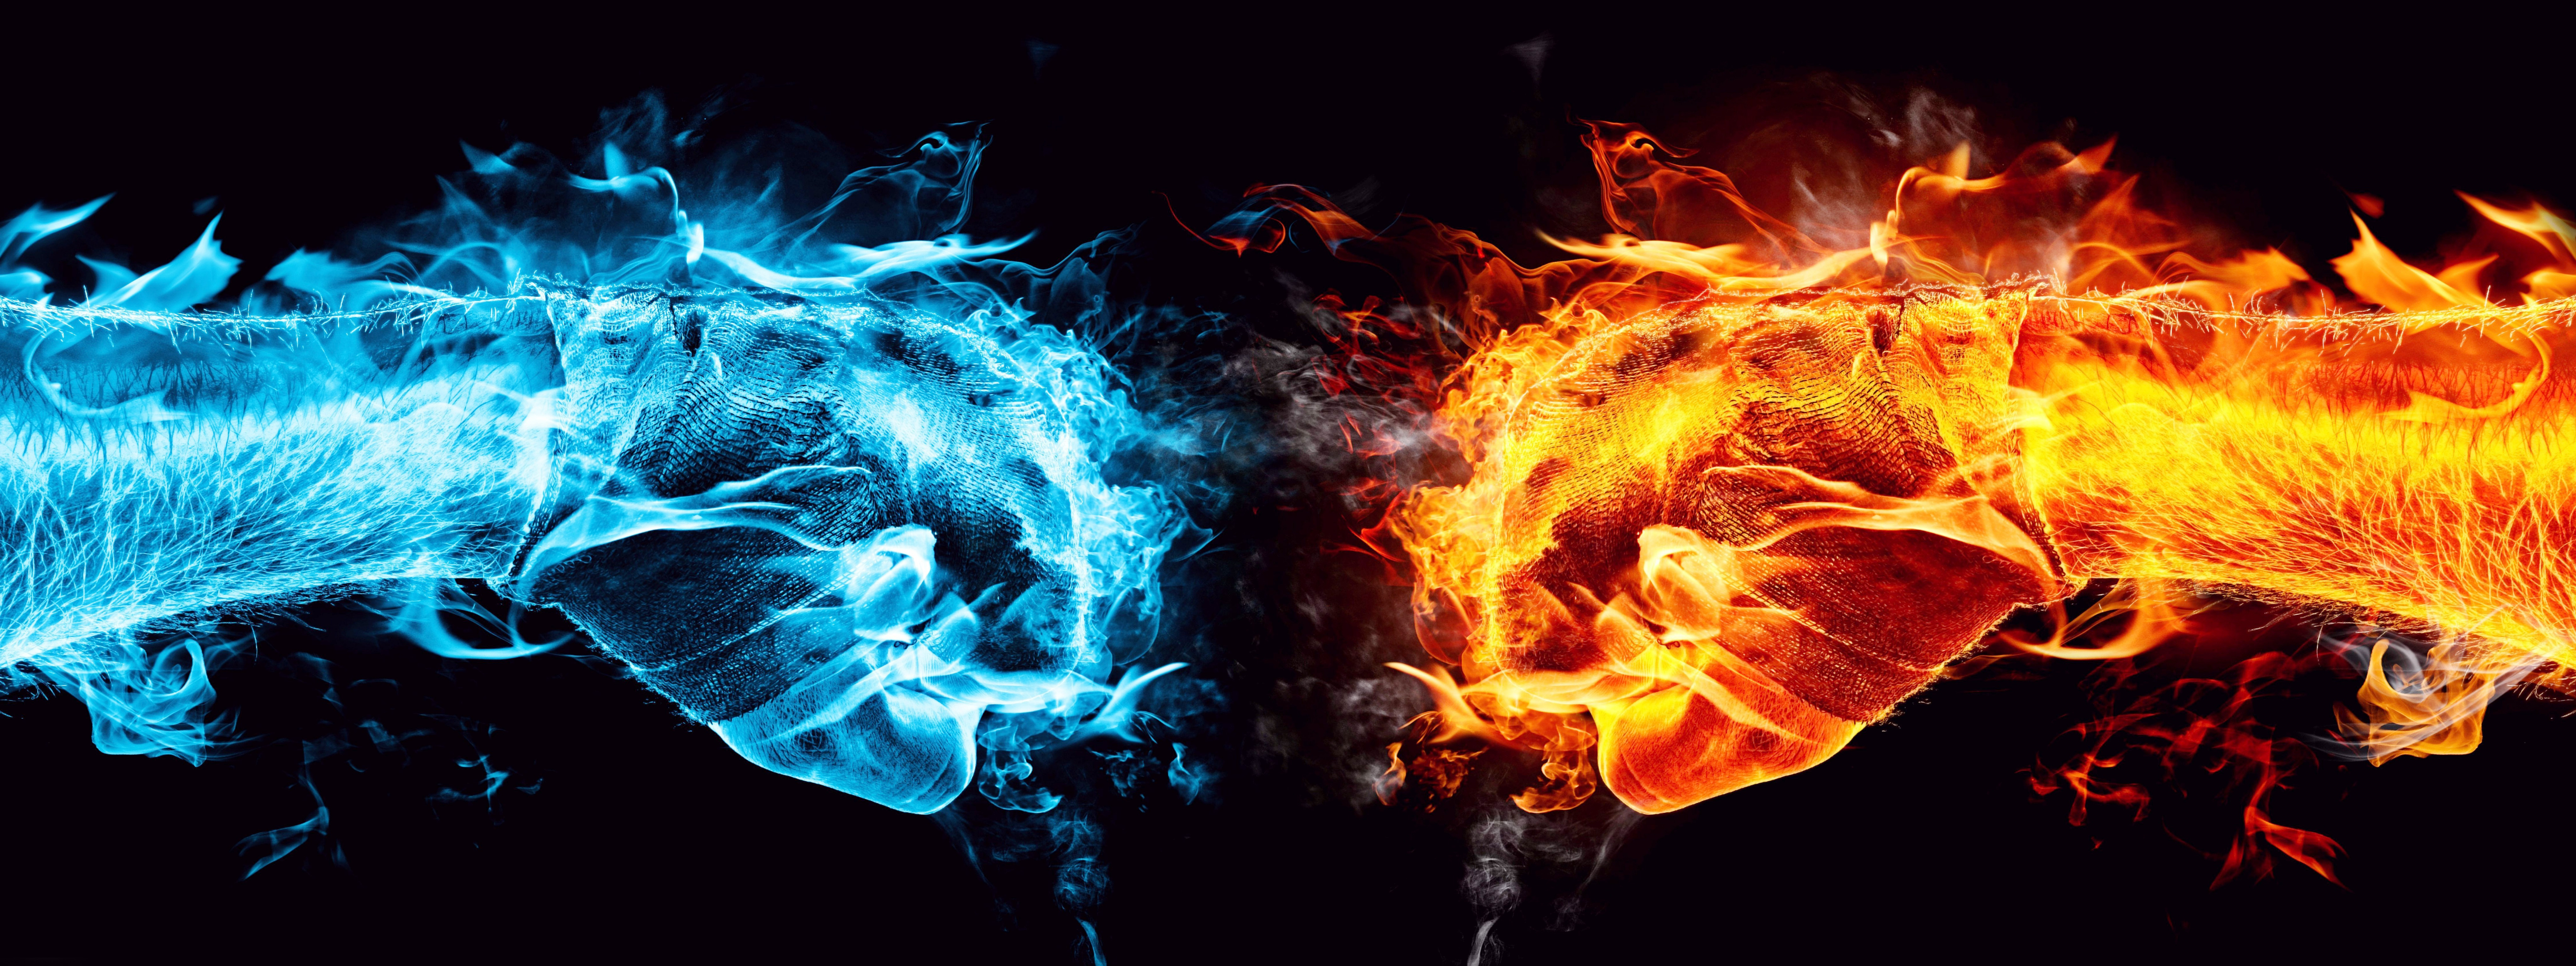 Water And Fire Fists Battle Dual Screen Wallpaper